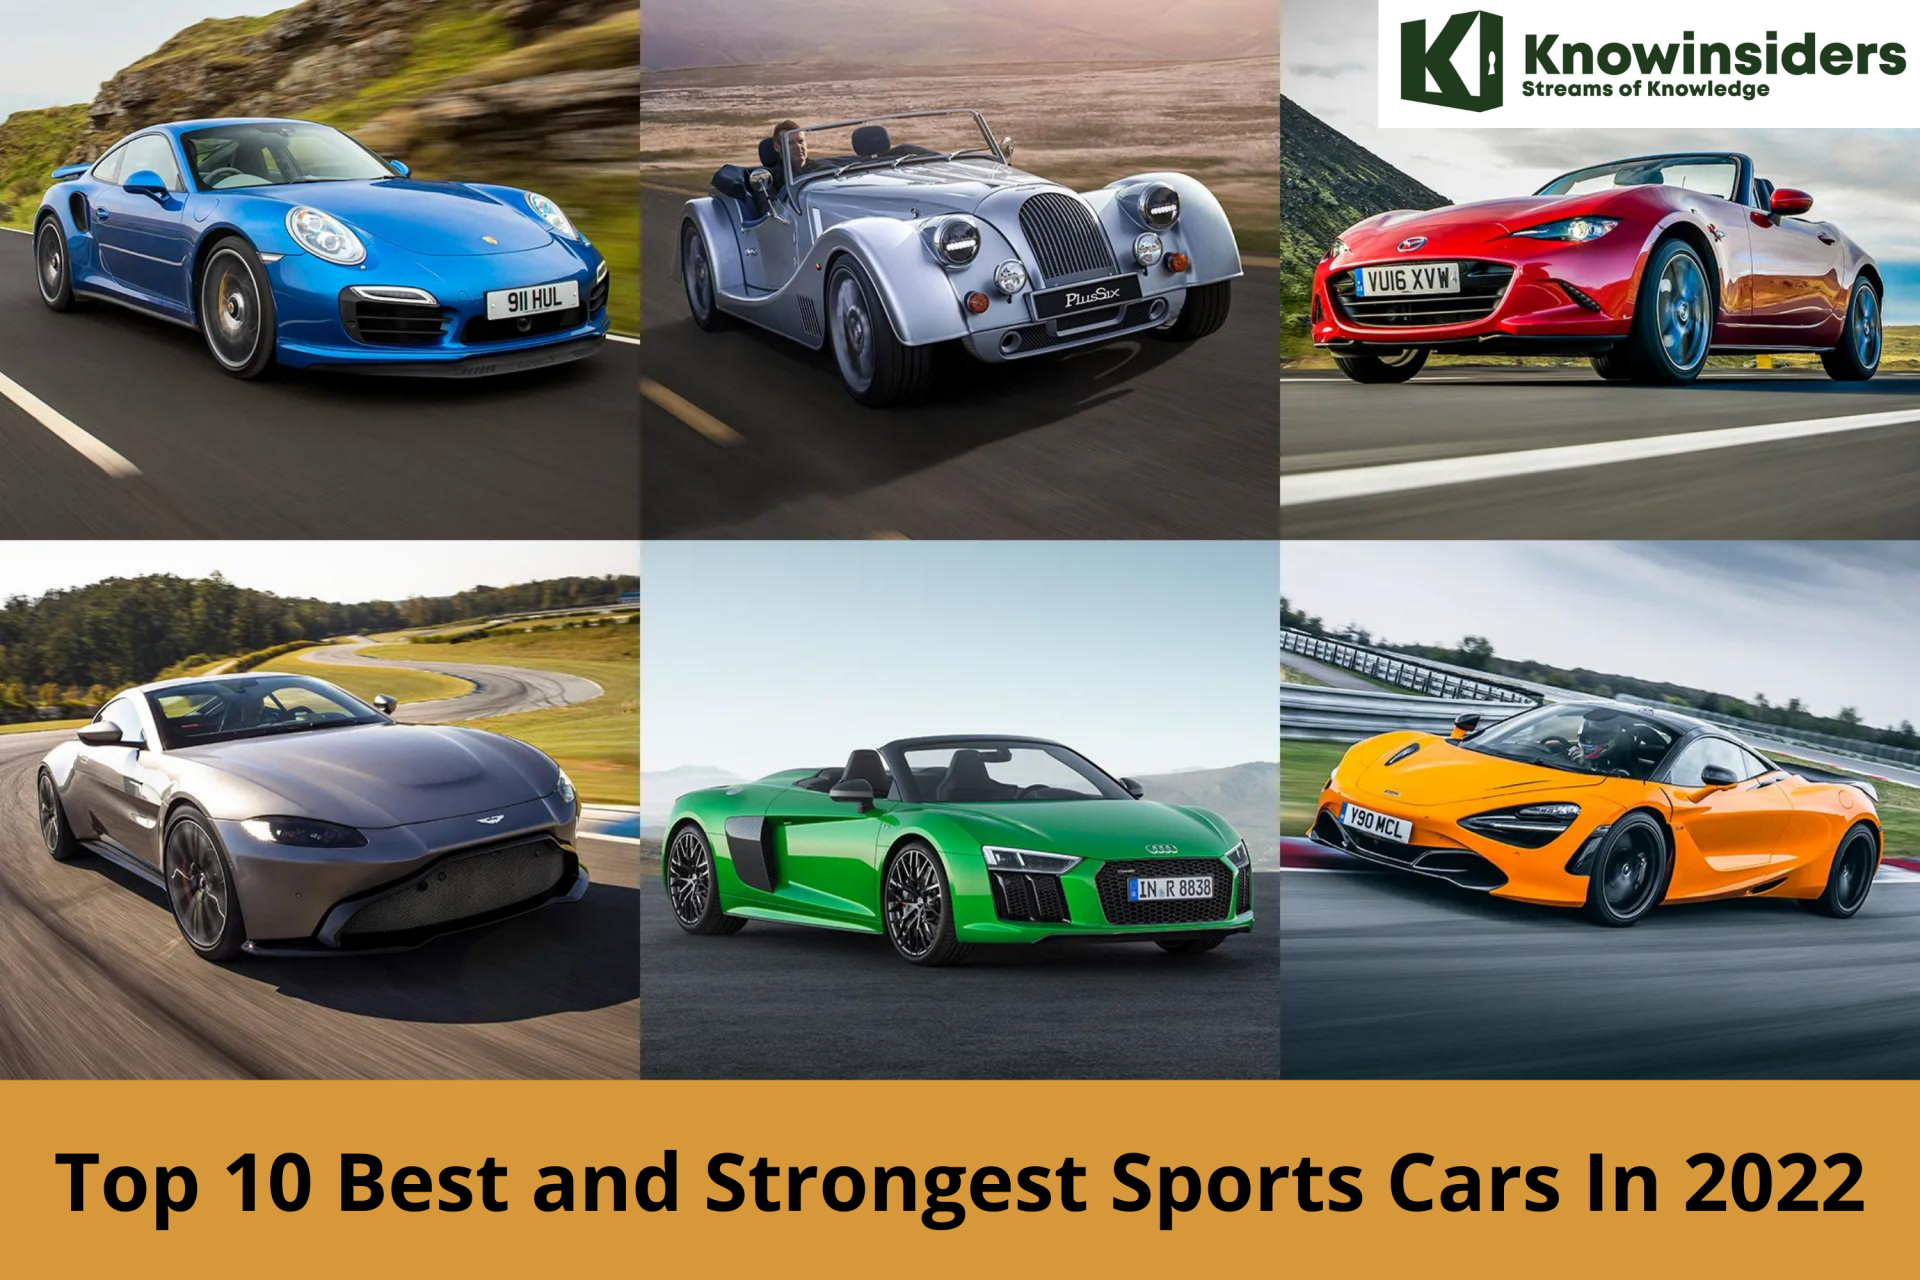 Top 10 Best and Strongest Sports Cars on Earth In 2022